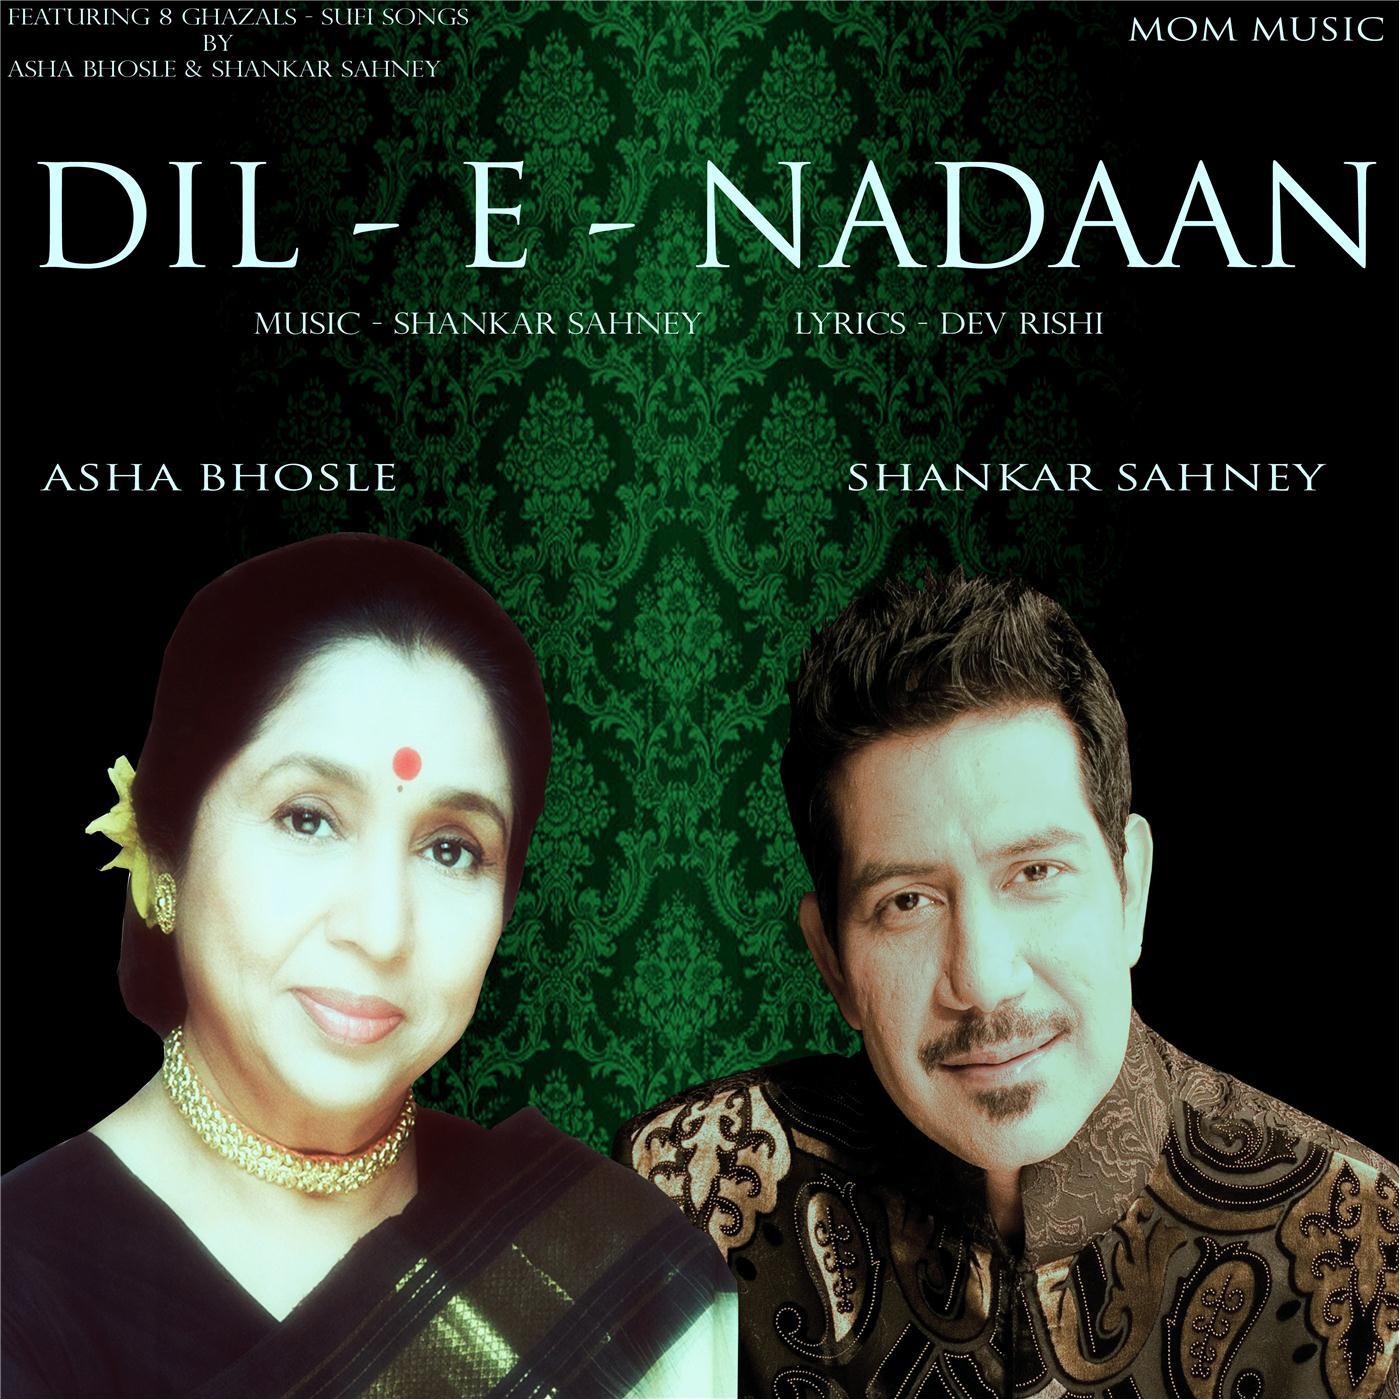 Dil - E - Nadaan